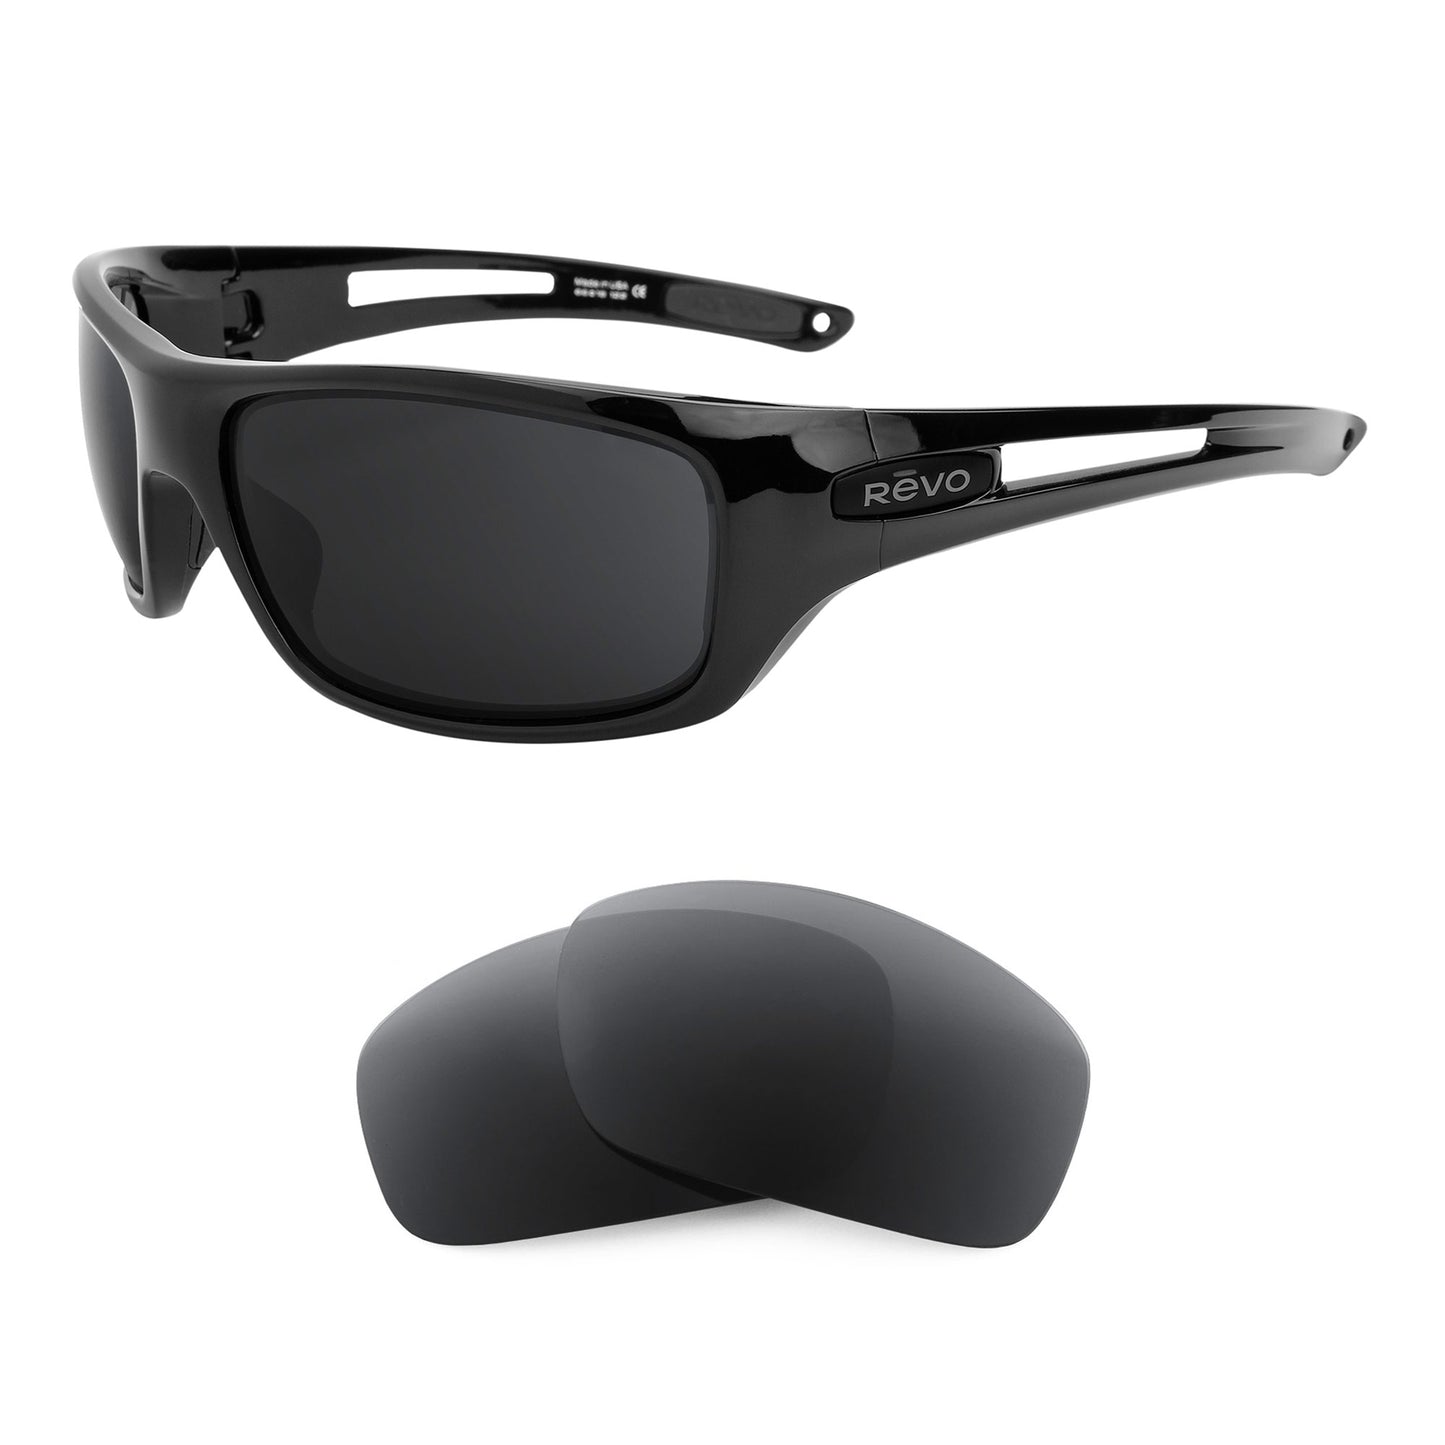 Revo Guide RE4054 sunglasses with replacement lenses